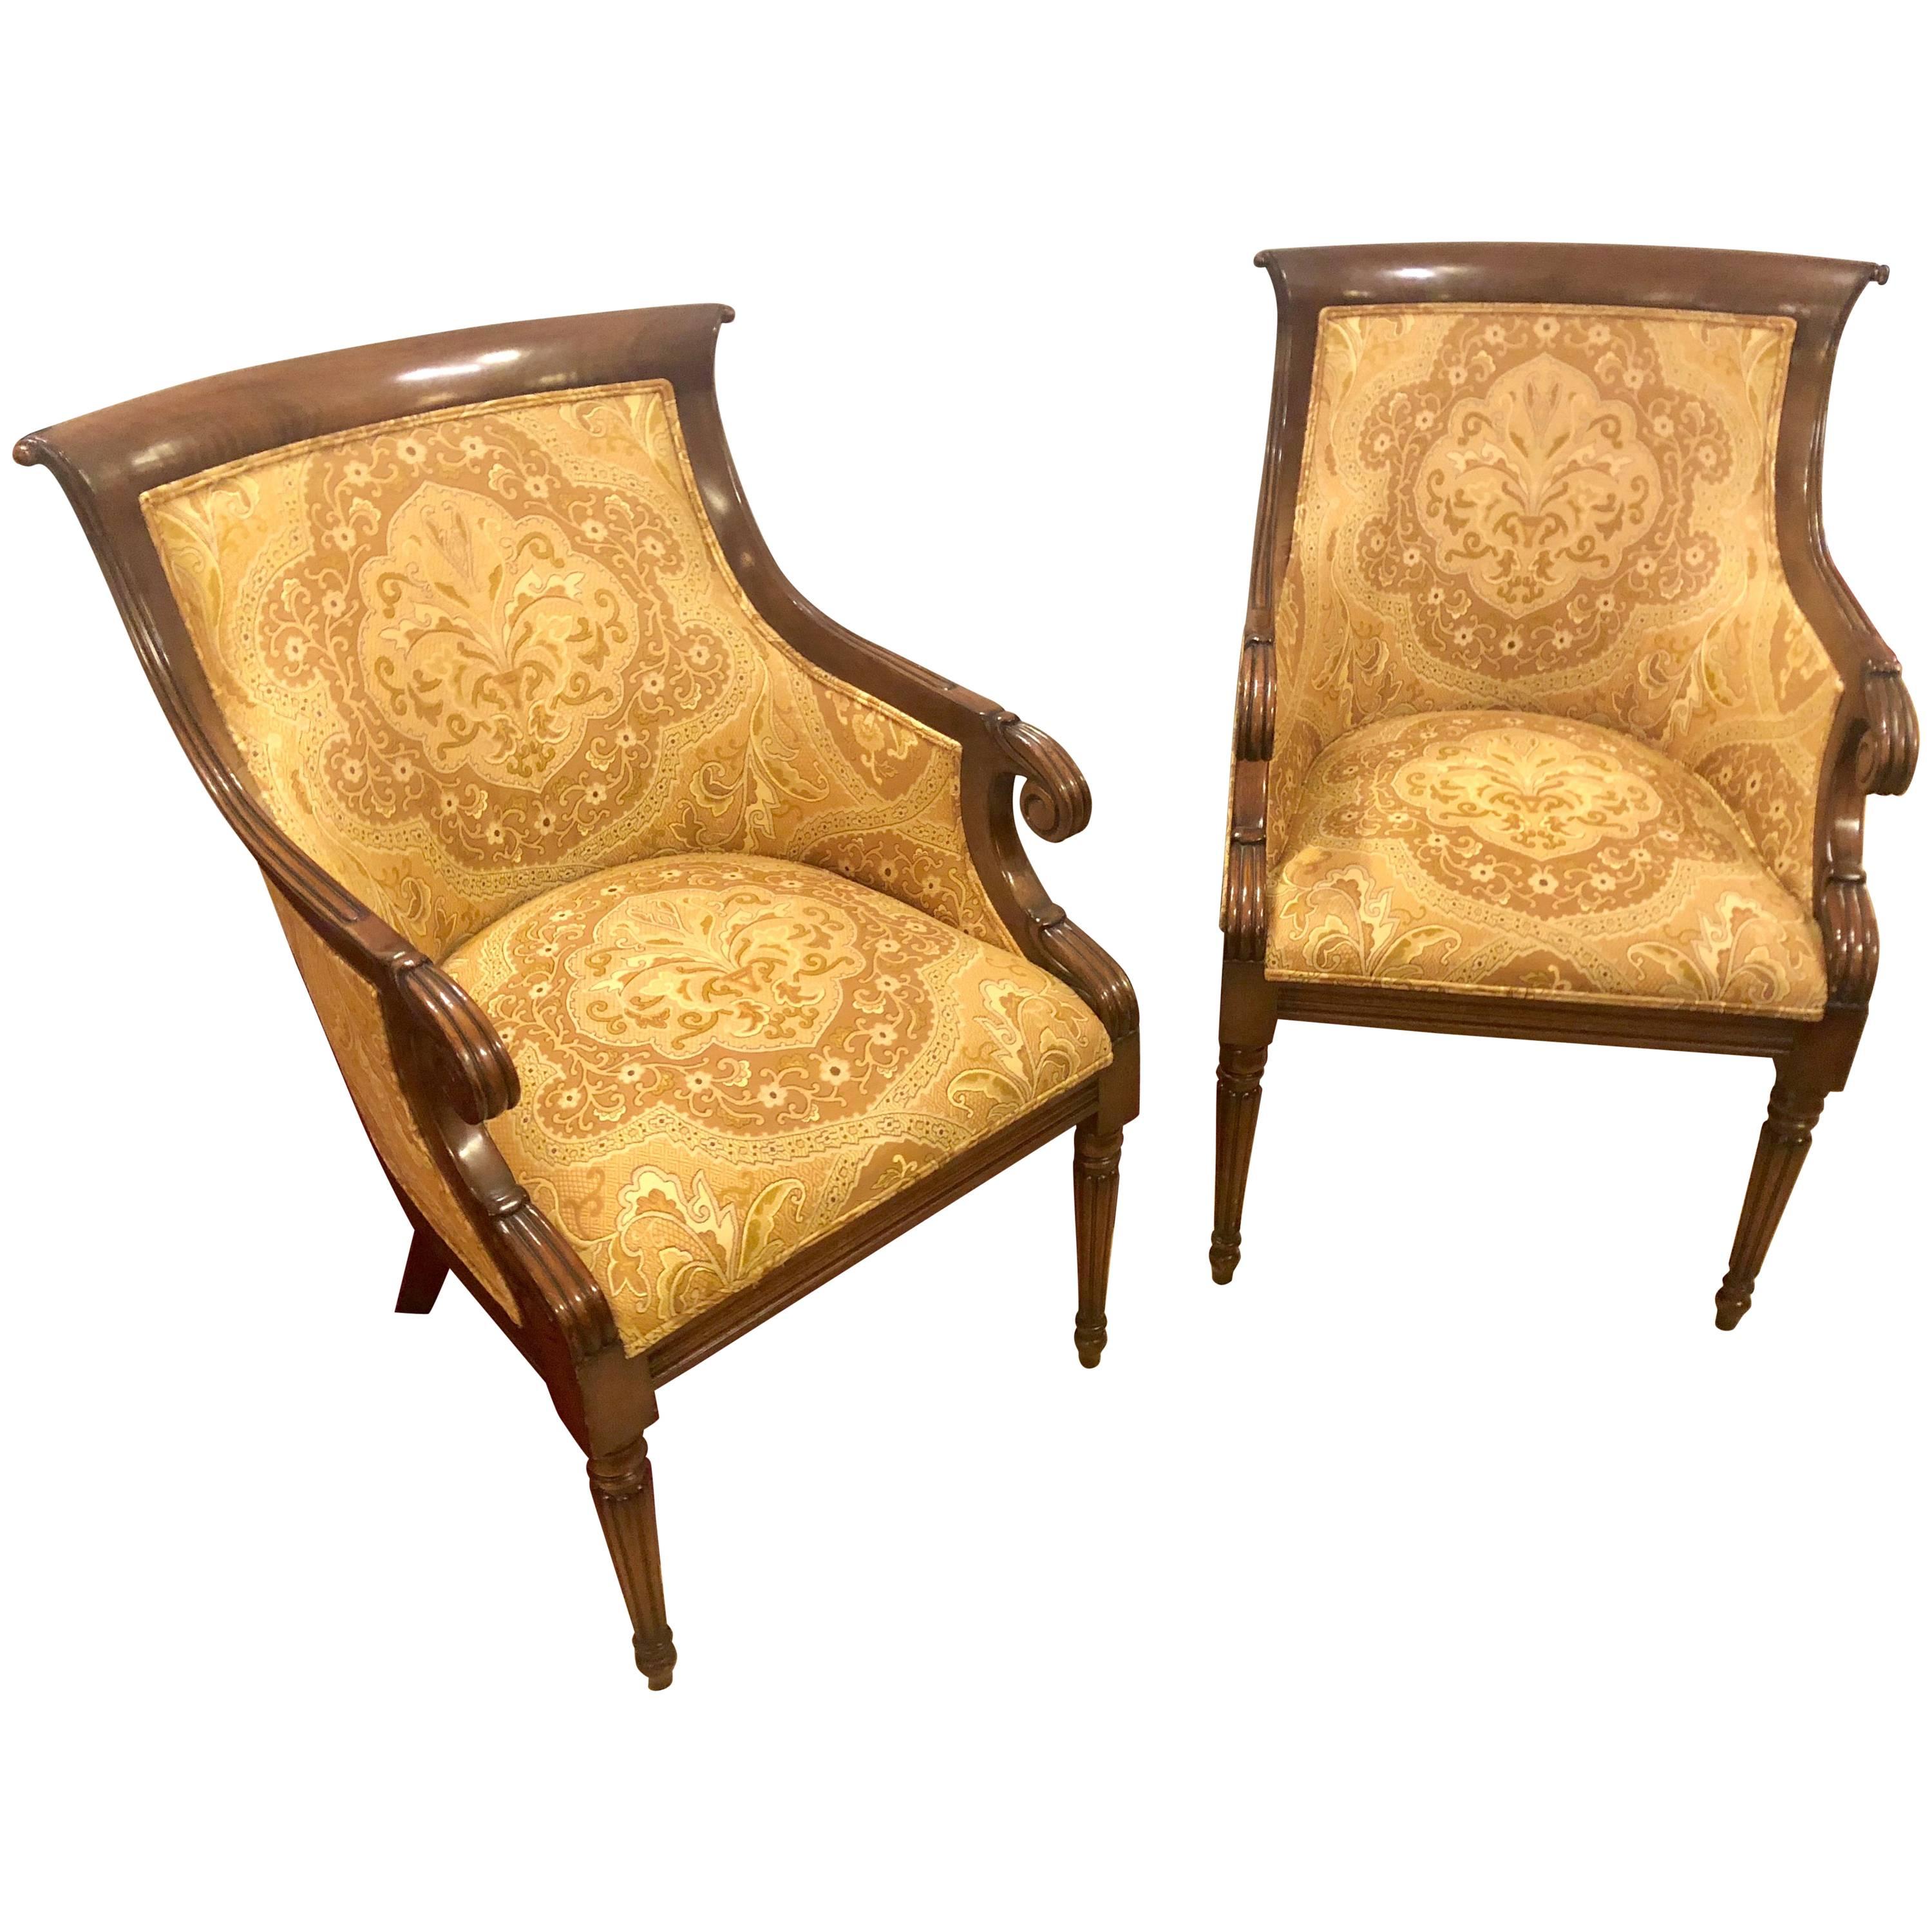 Pair of Finely Upholstered Smith and Watson Office, Bergere Fireside Armchairs